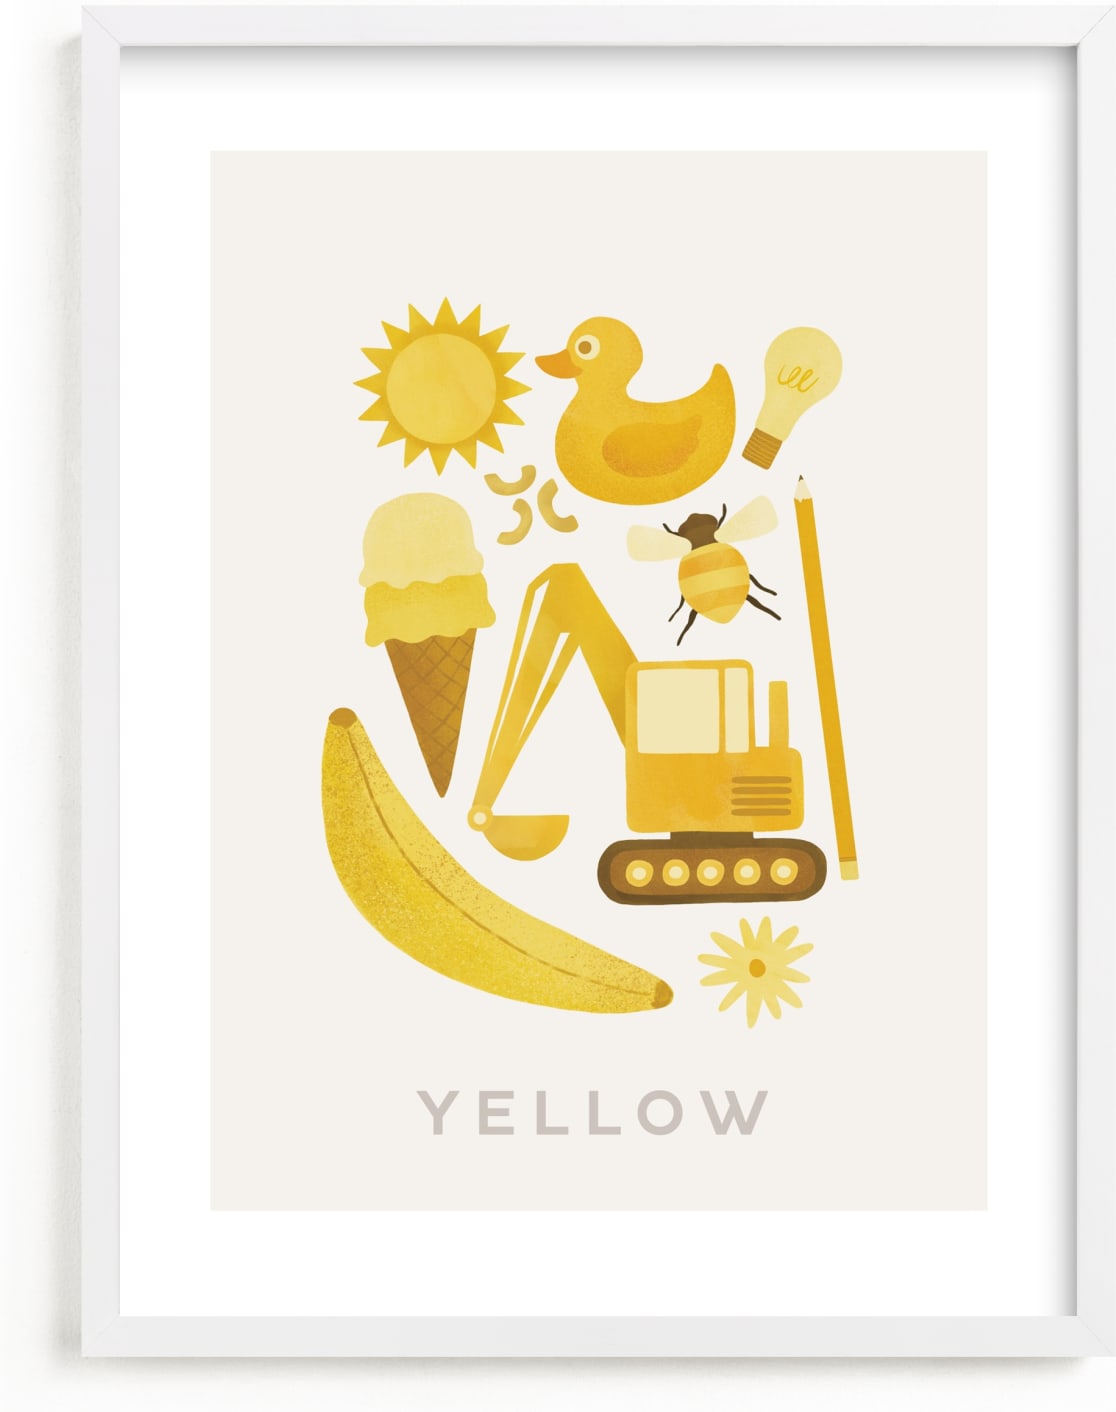 This is a yellow kids wall art by Ana Peake called Ten Yellow Things.